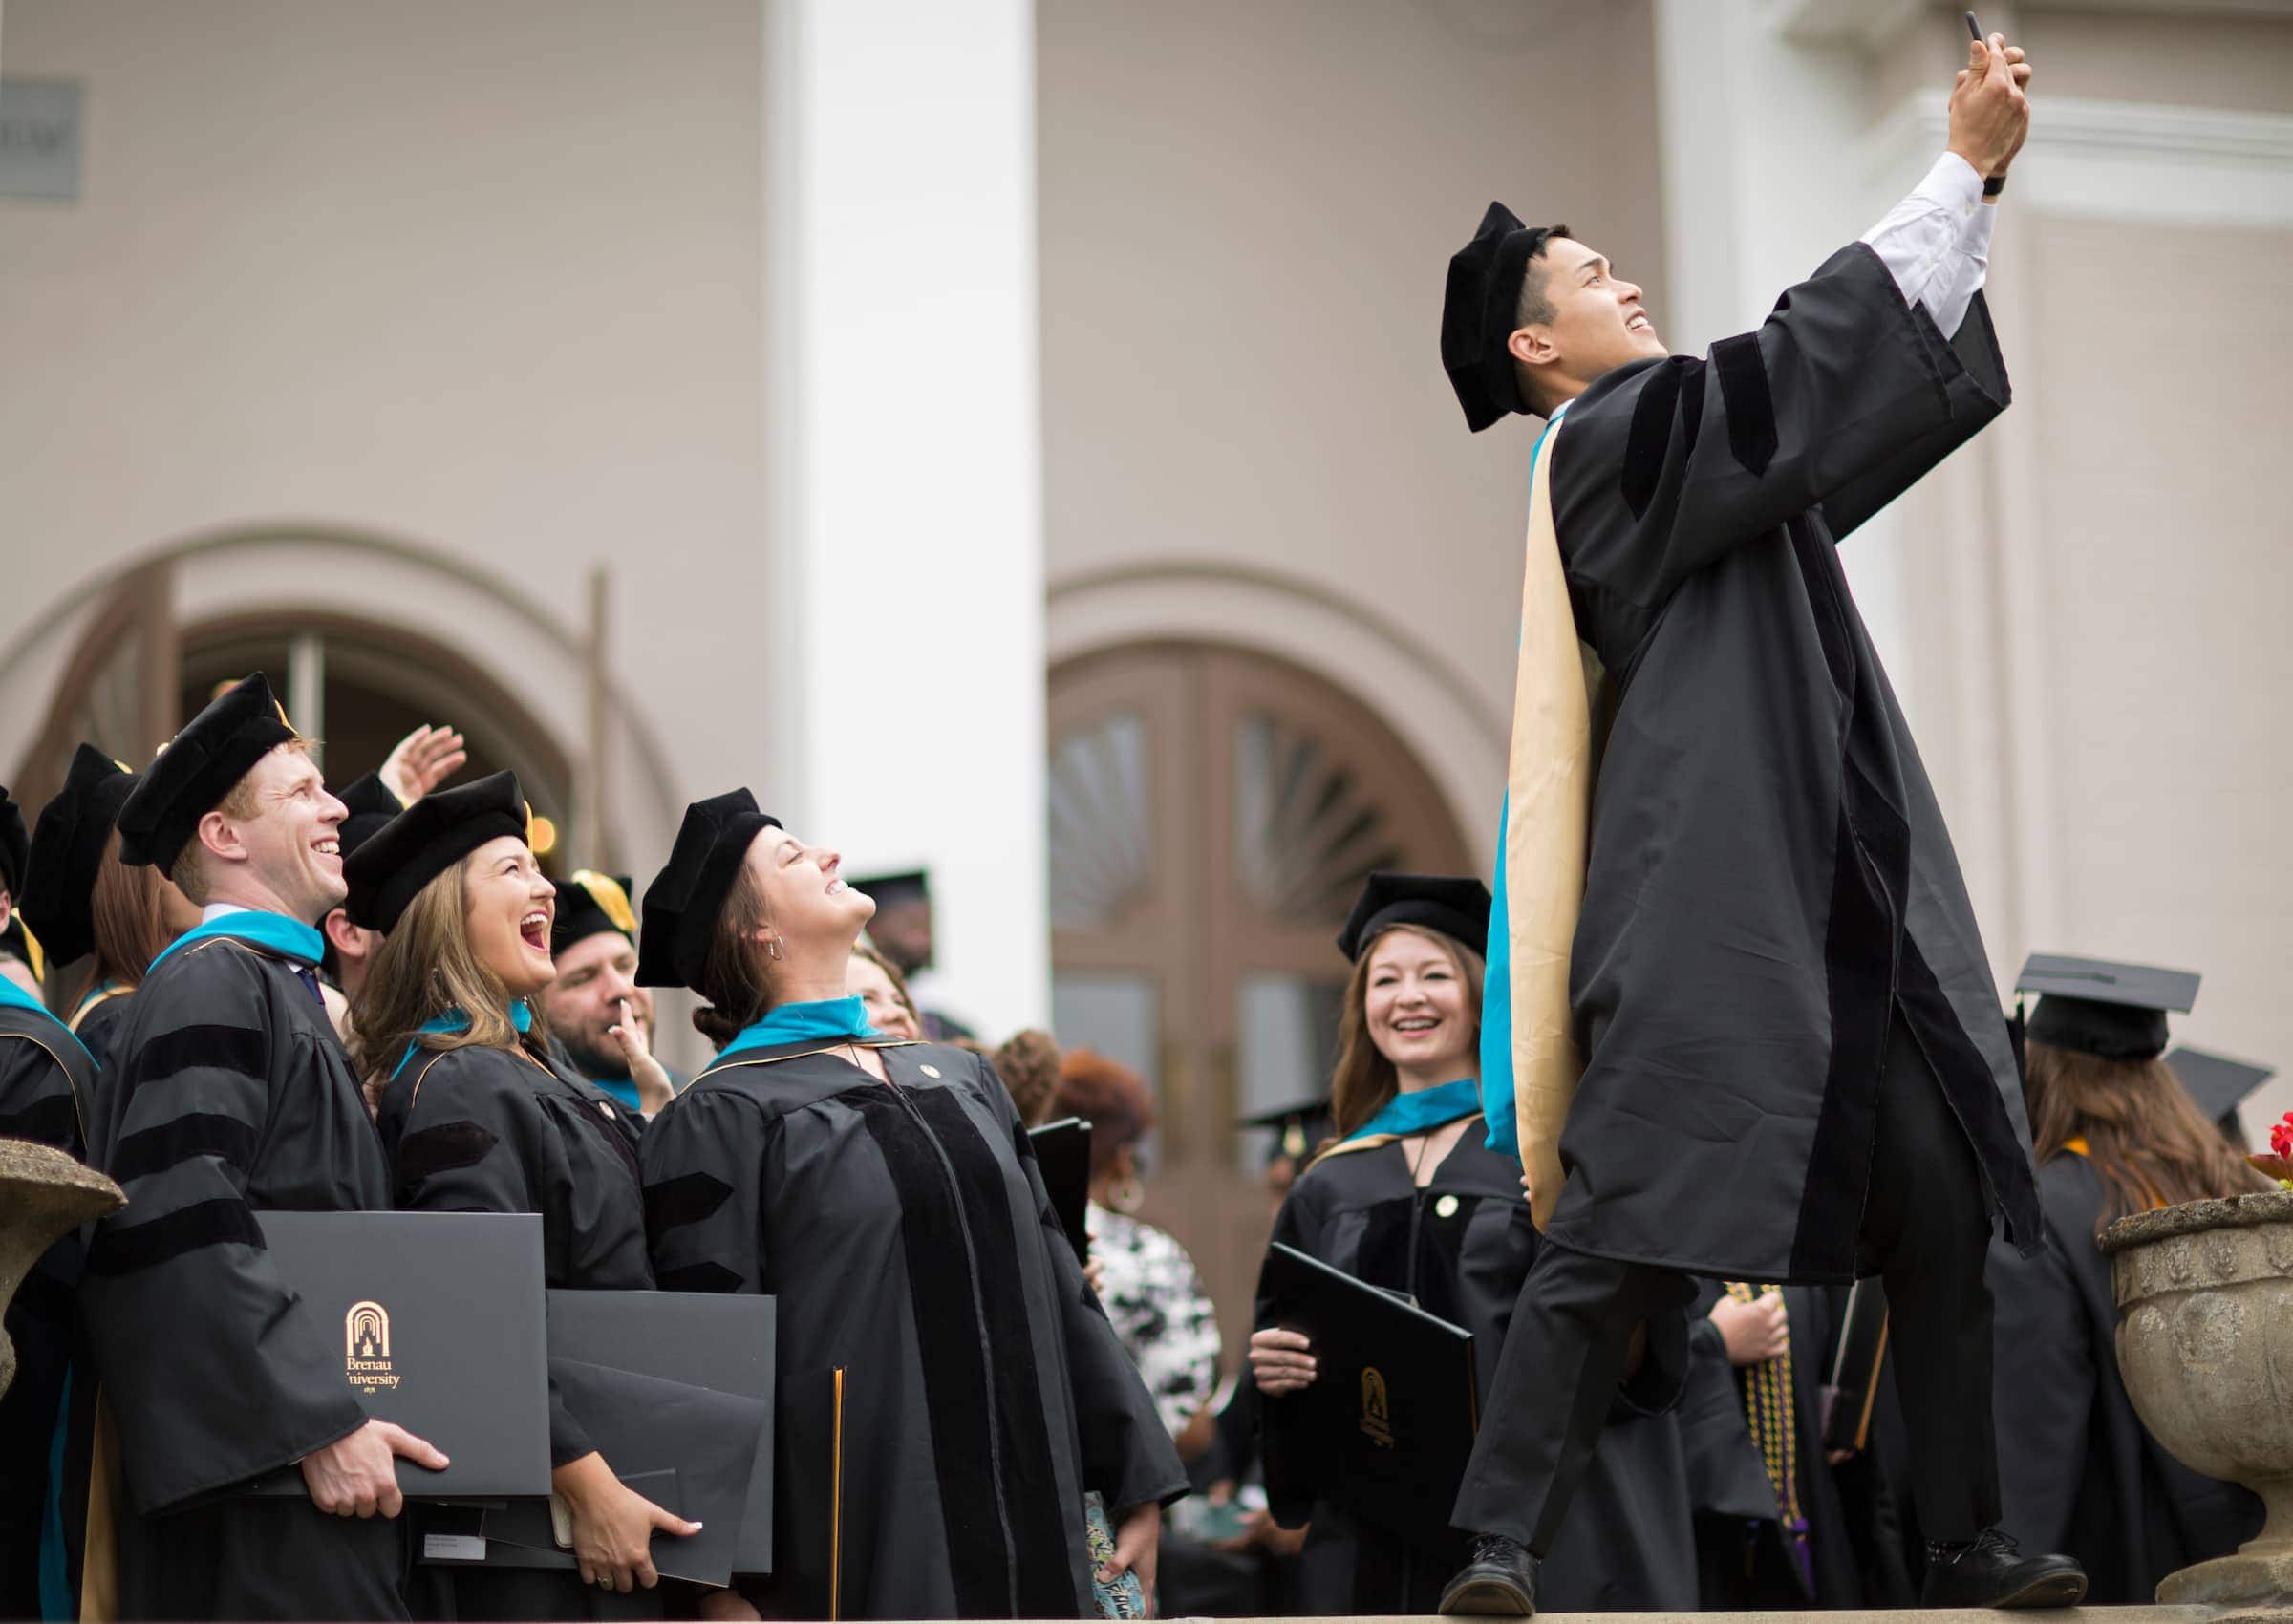 Andrew Phan takes a selfie with his fellow members of the inaugural Doctor of Physical Therapy cohort following the 2018 Spring Commencement Ceremony on Saturday, May 5, on Brenau University's historic Gainesville campus. (Nick Bowman for Brenau University)